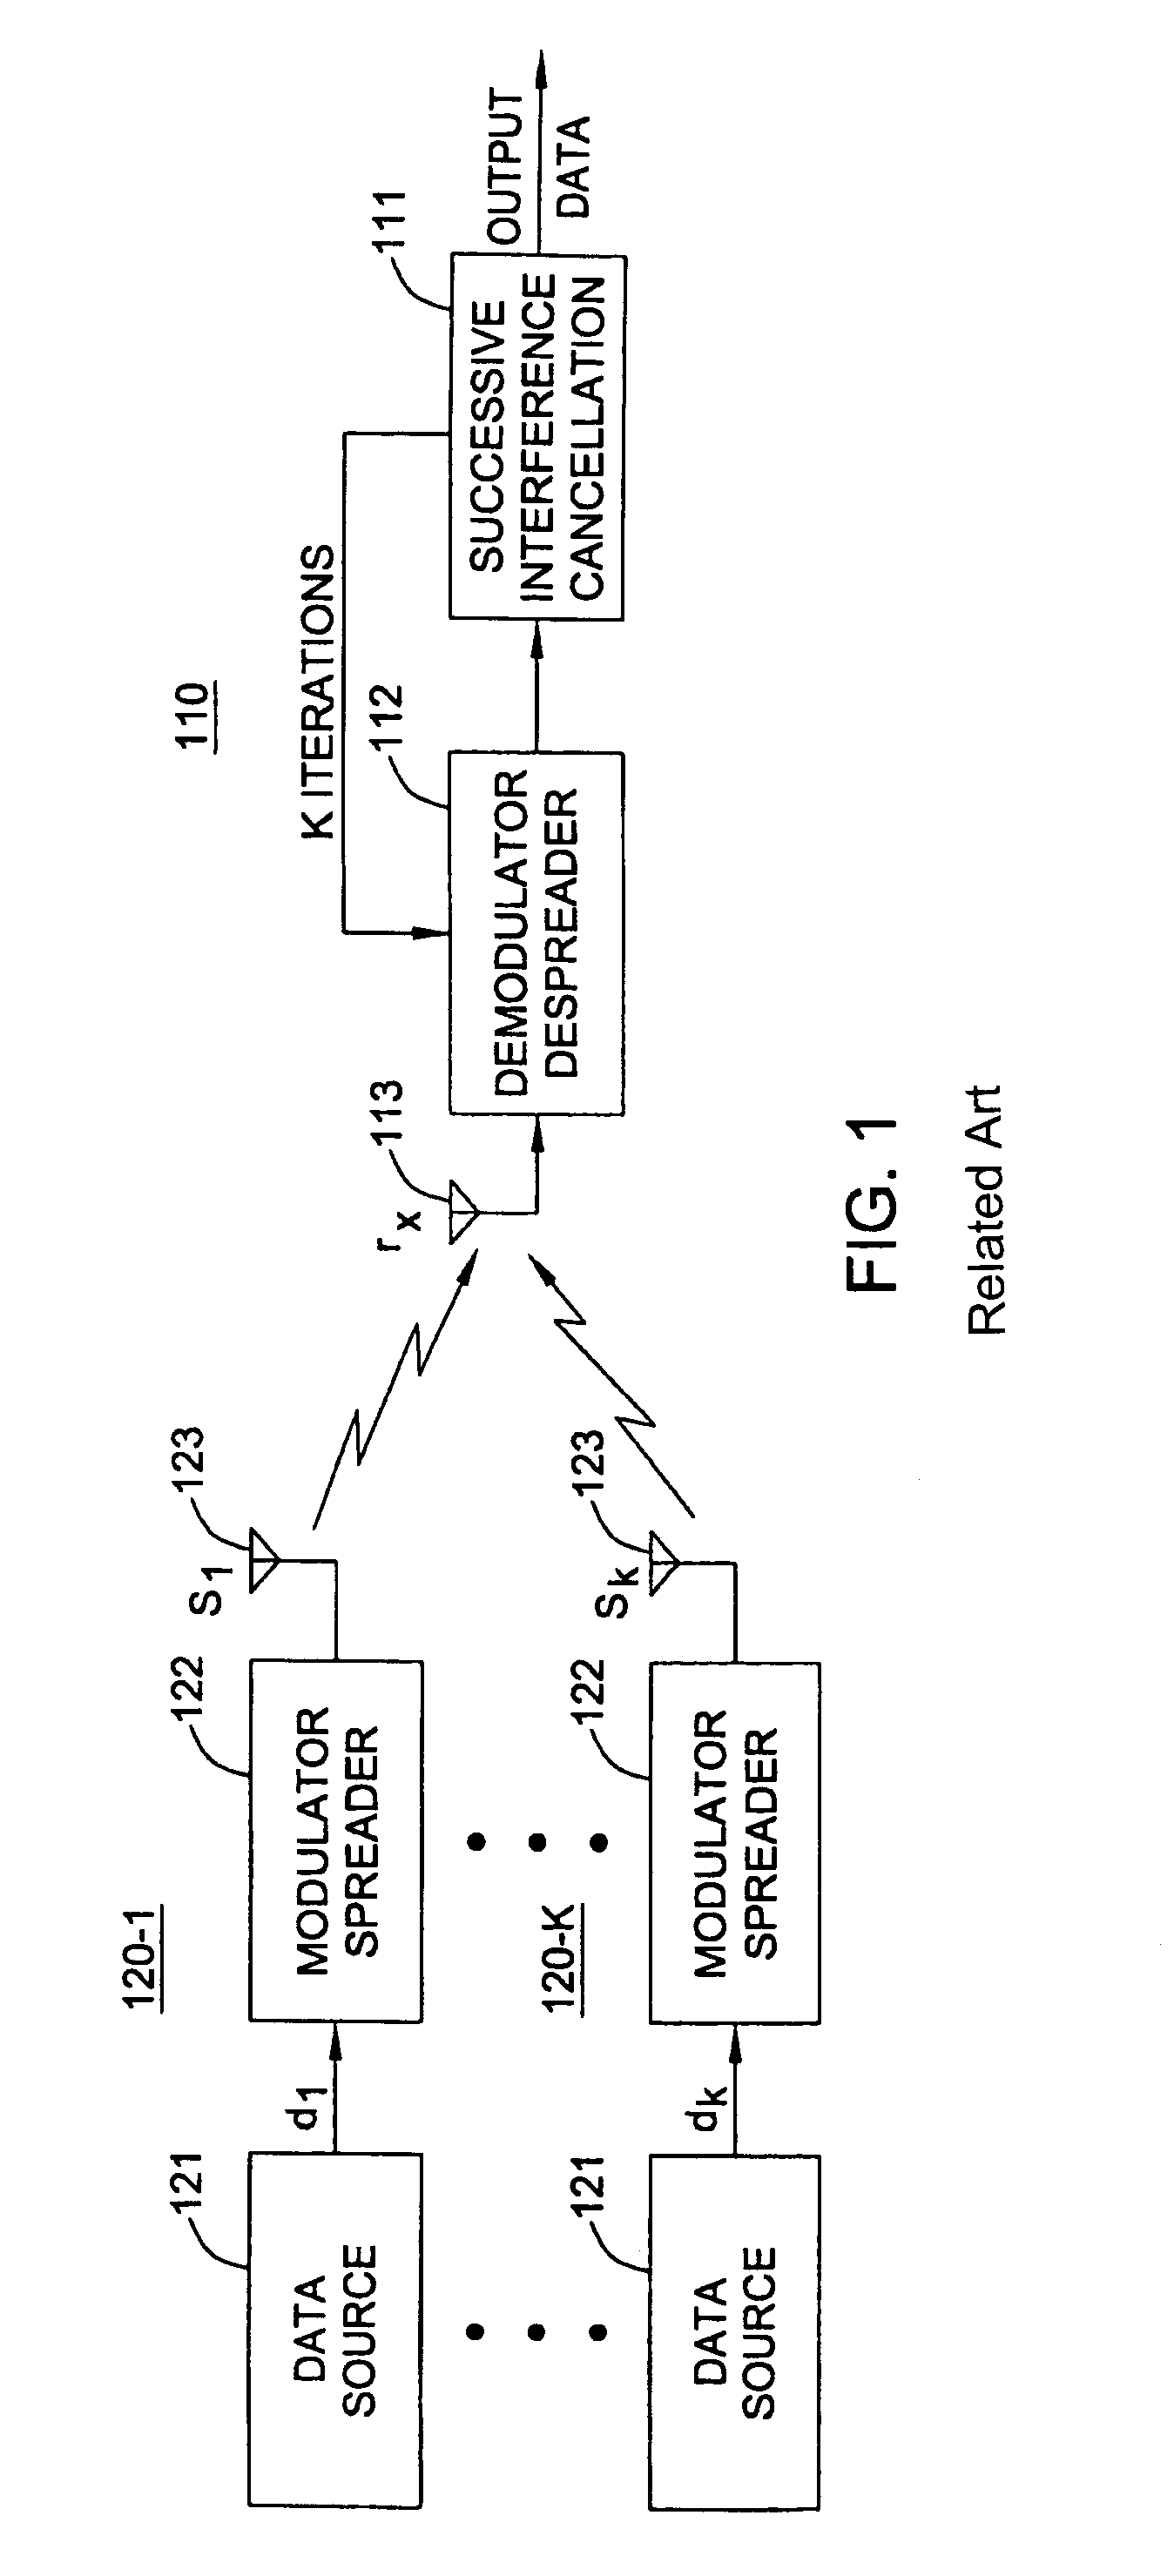 Transmit power adaptation for CDMA communication systems using successive interference cancellation